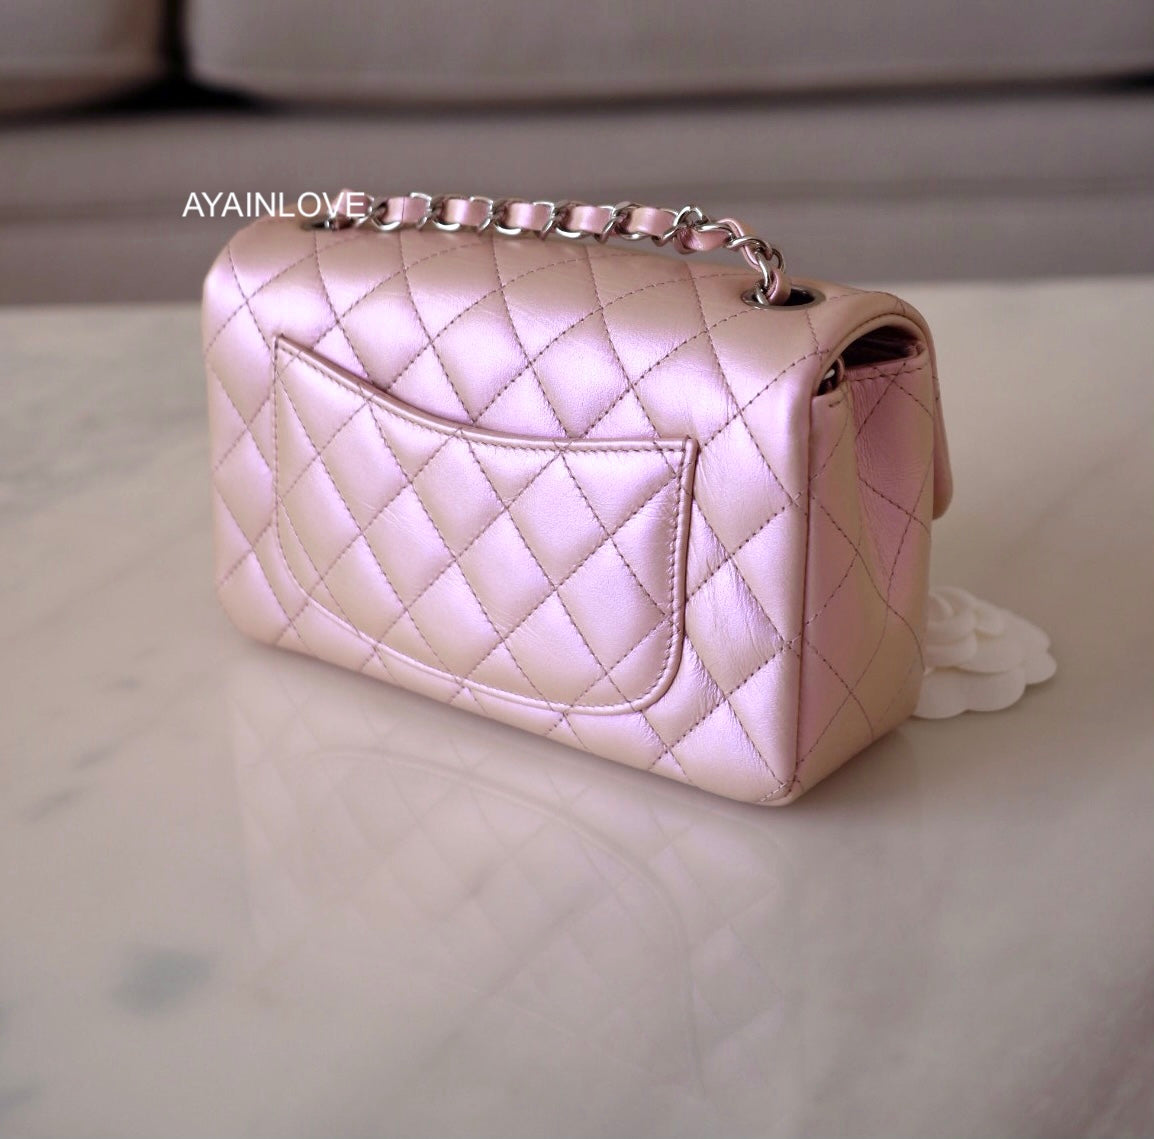 Chanel Gabrielle Mini - 9 For Sale on 1stDibs